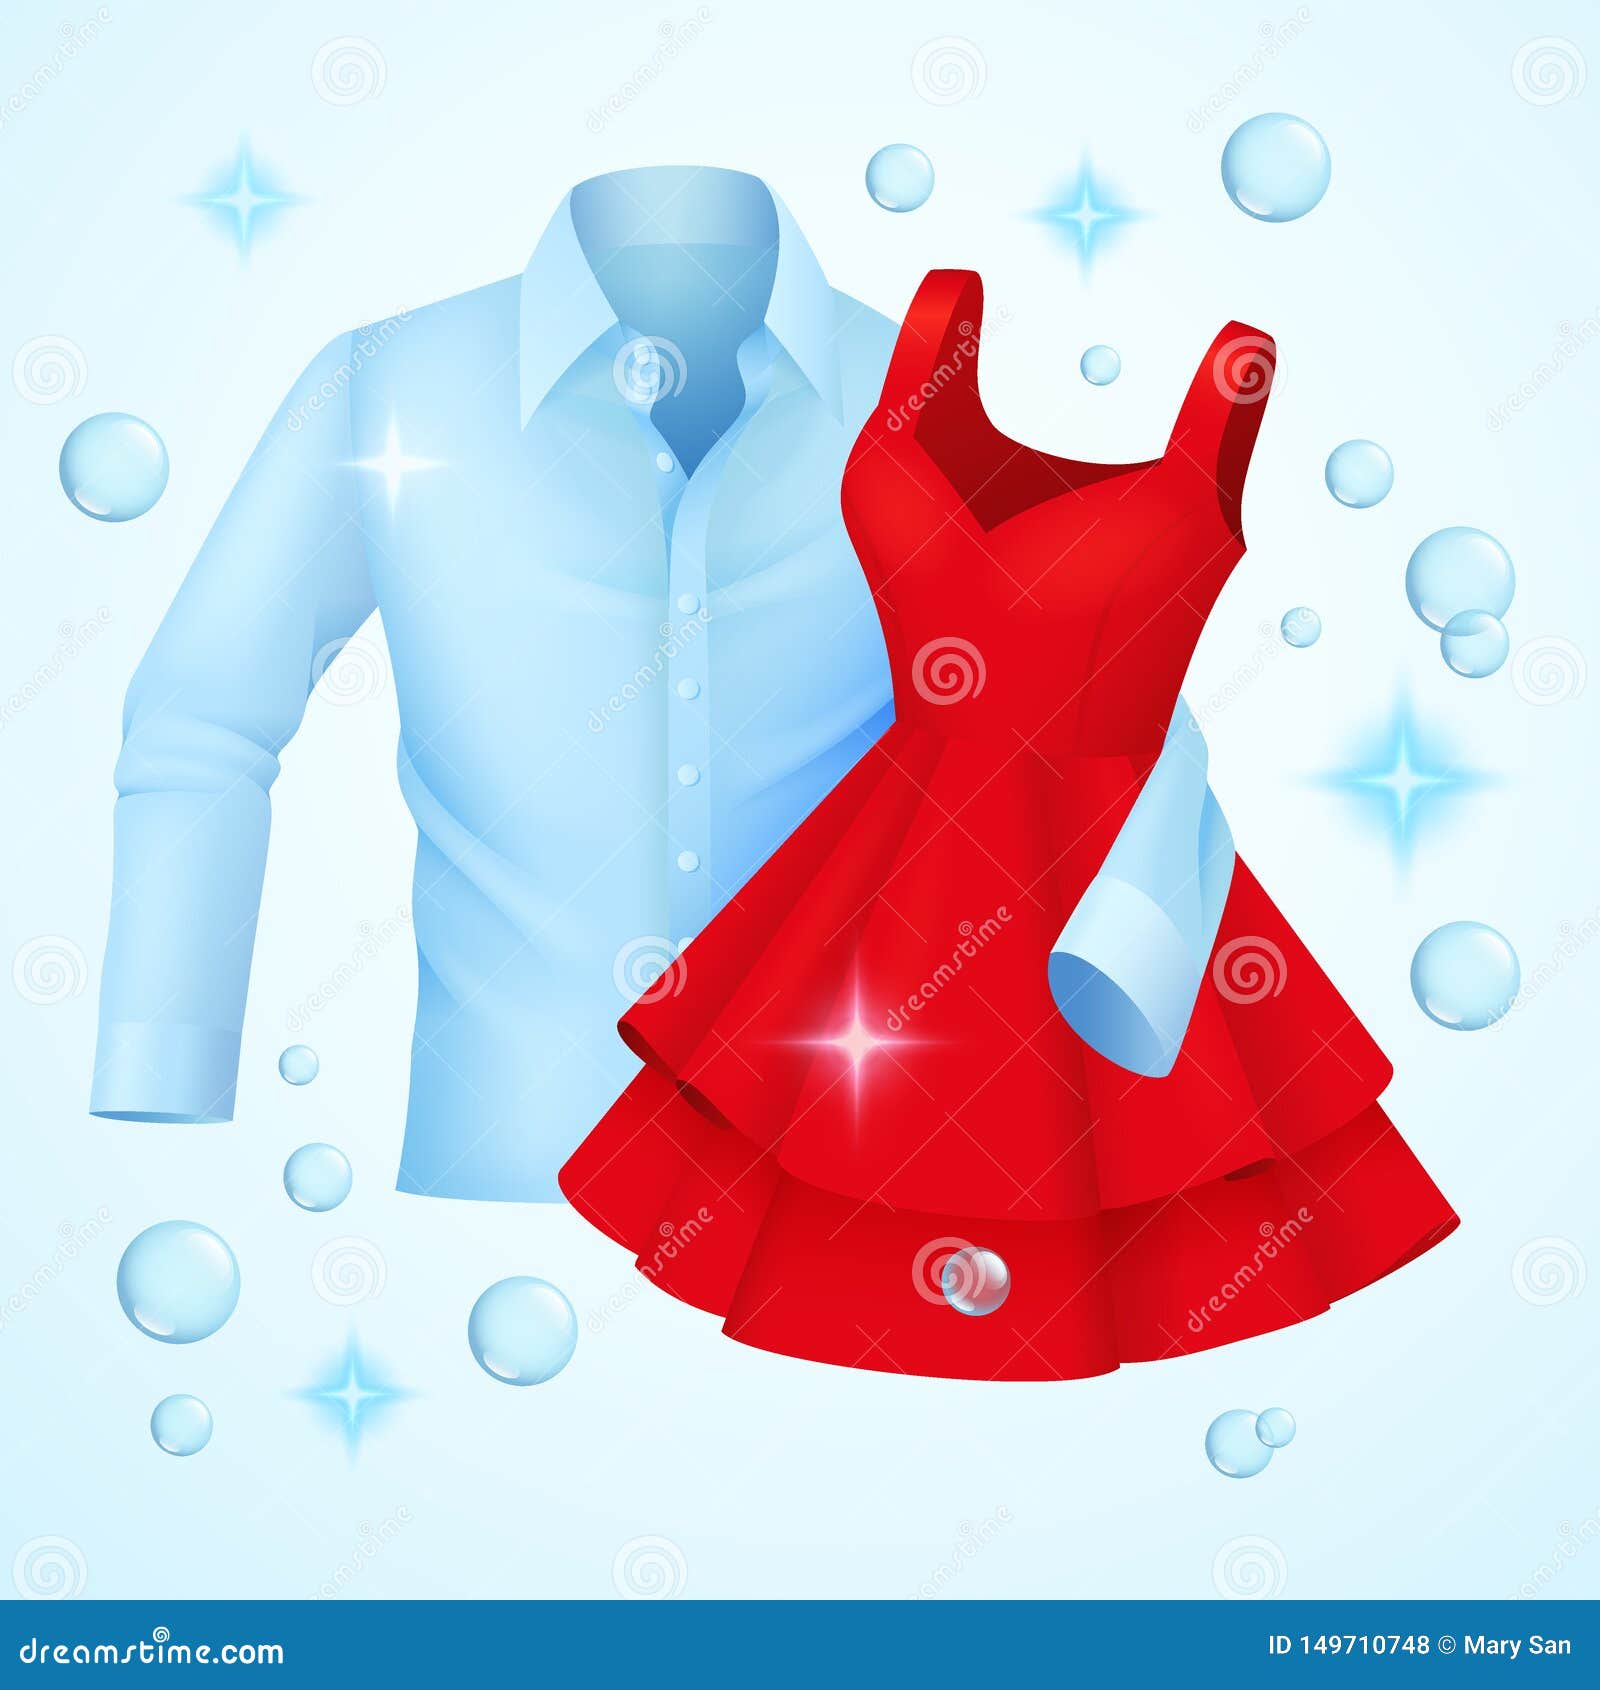 Wearing Clean Clothes Stock Illustrations – 274 Wearing Clean Clothes Stock  Illustrations, Vectors & Clipart - Dreamstime